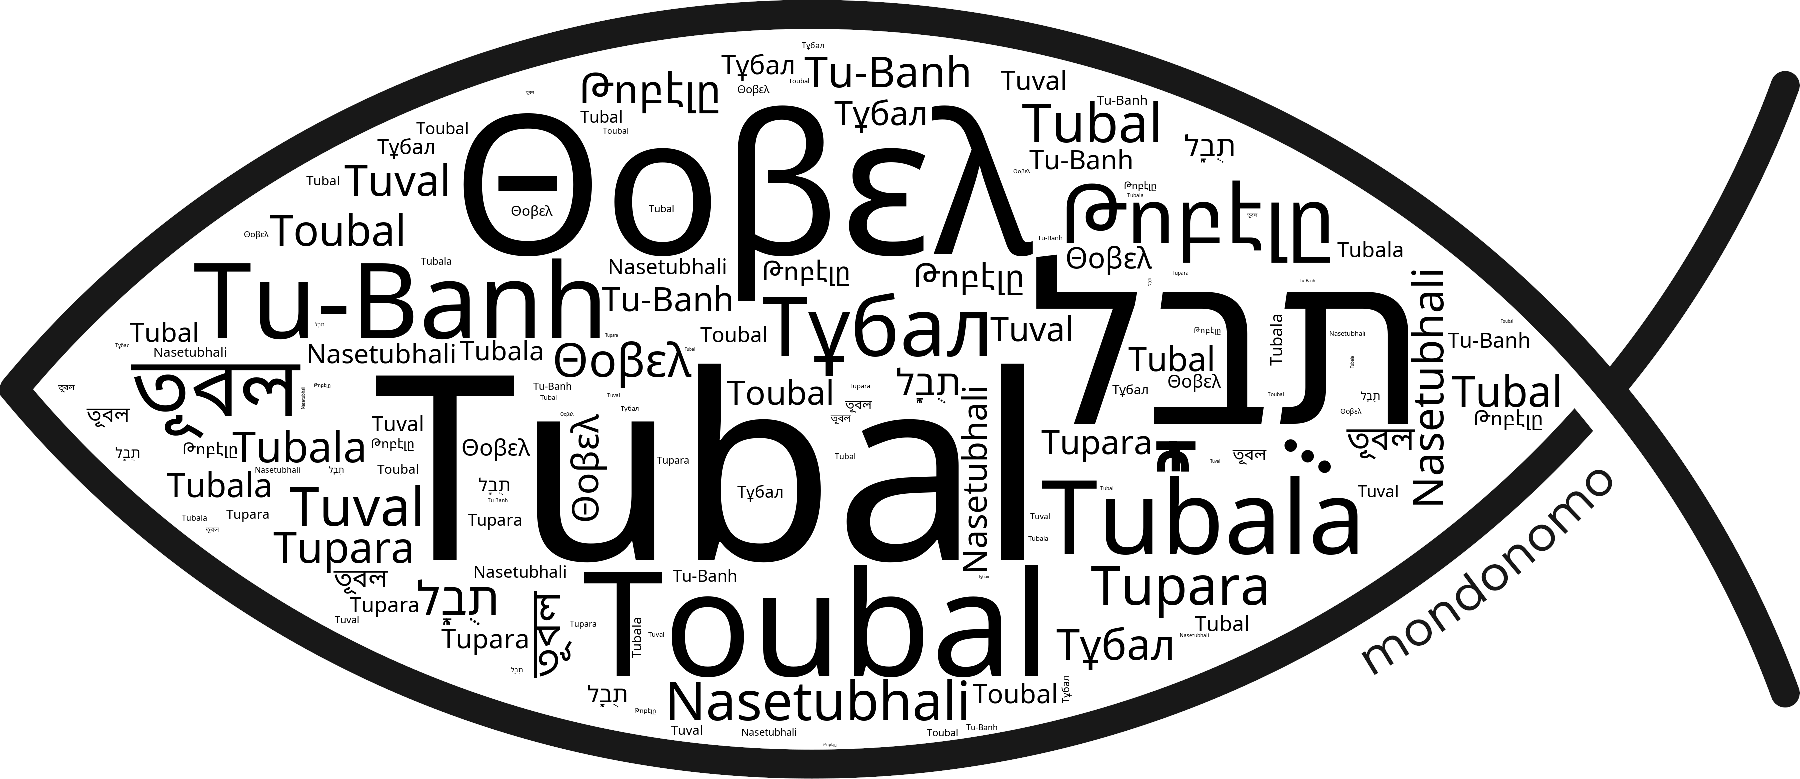 Name Tubal in the world's Bibles